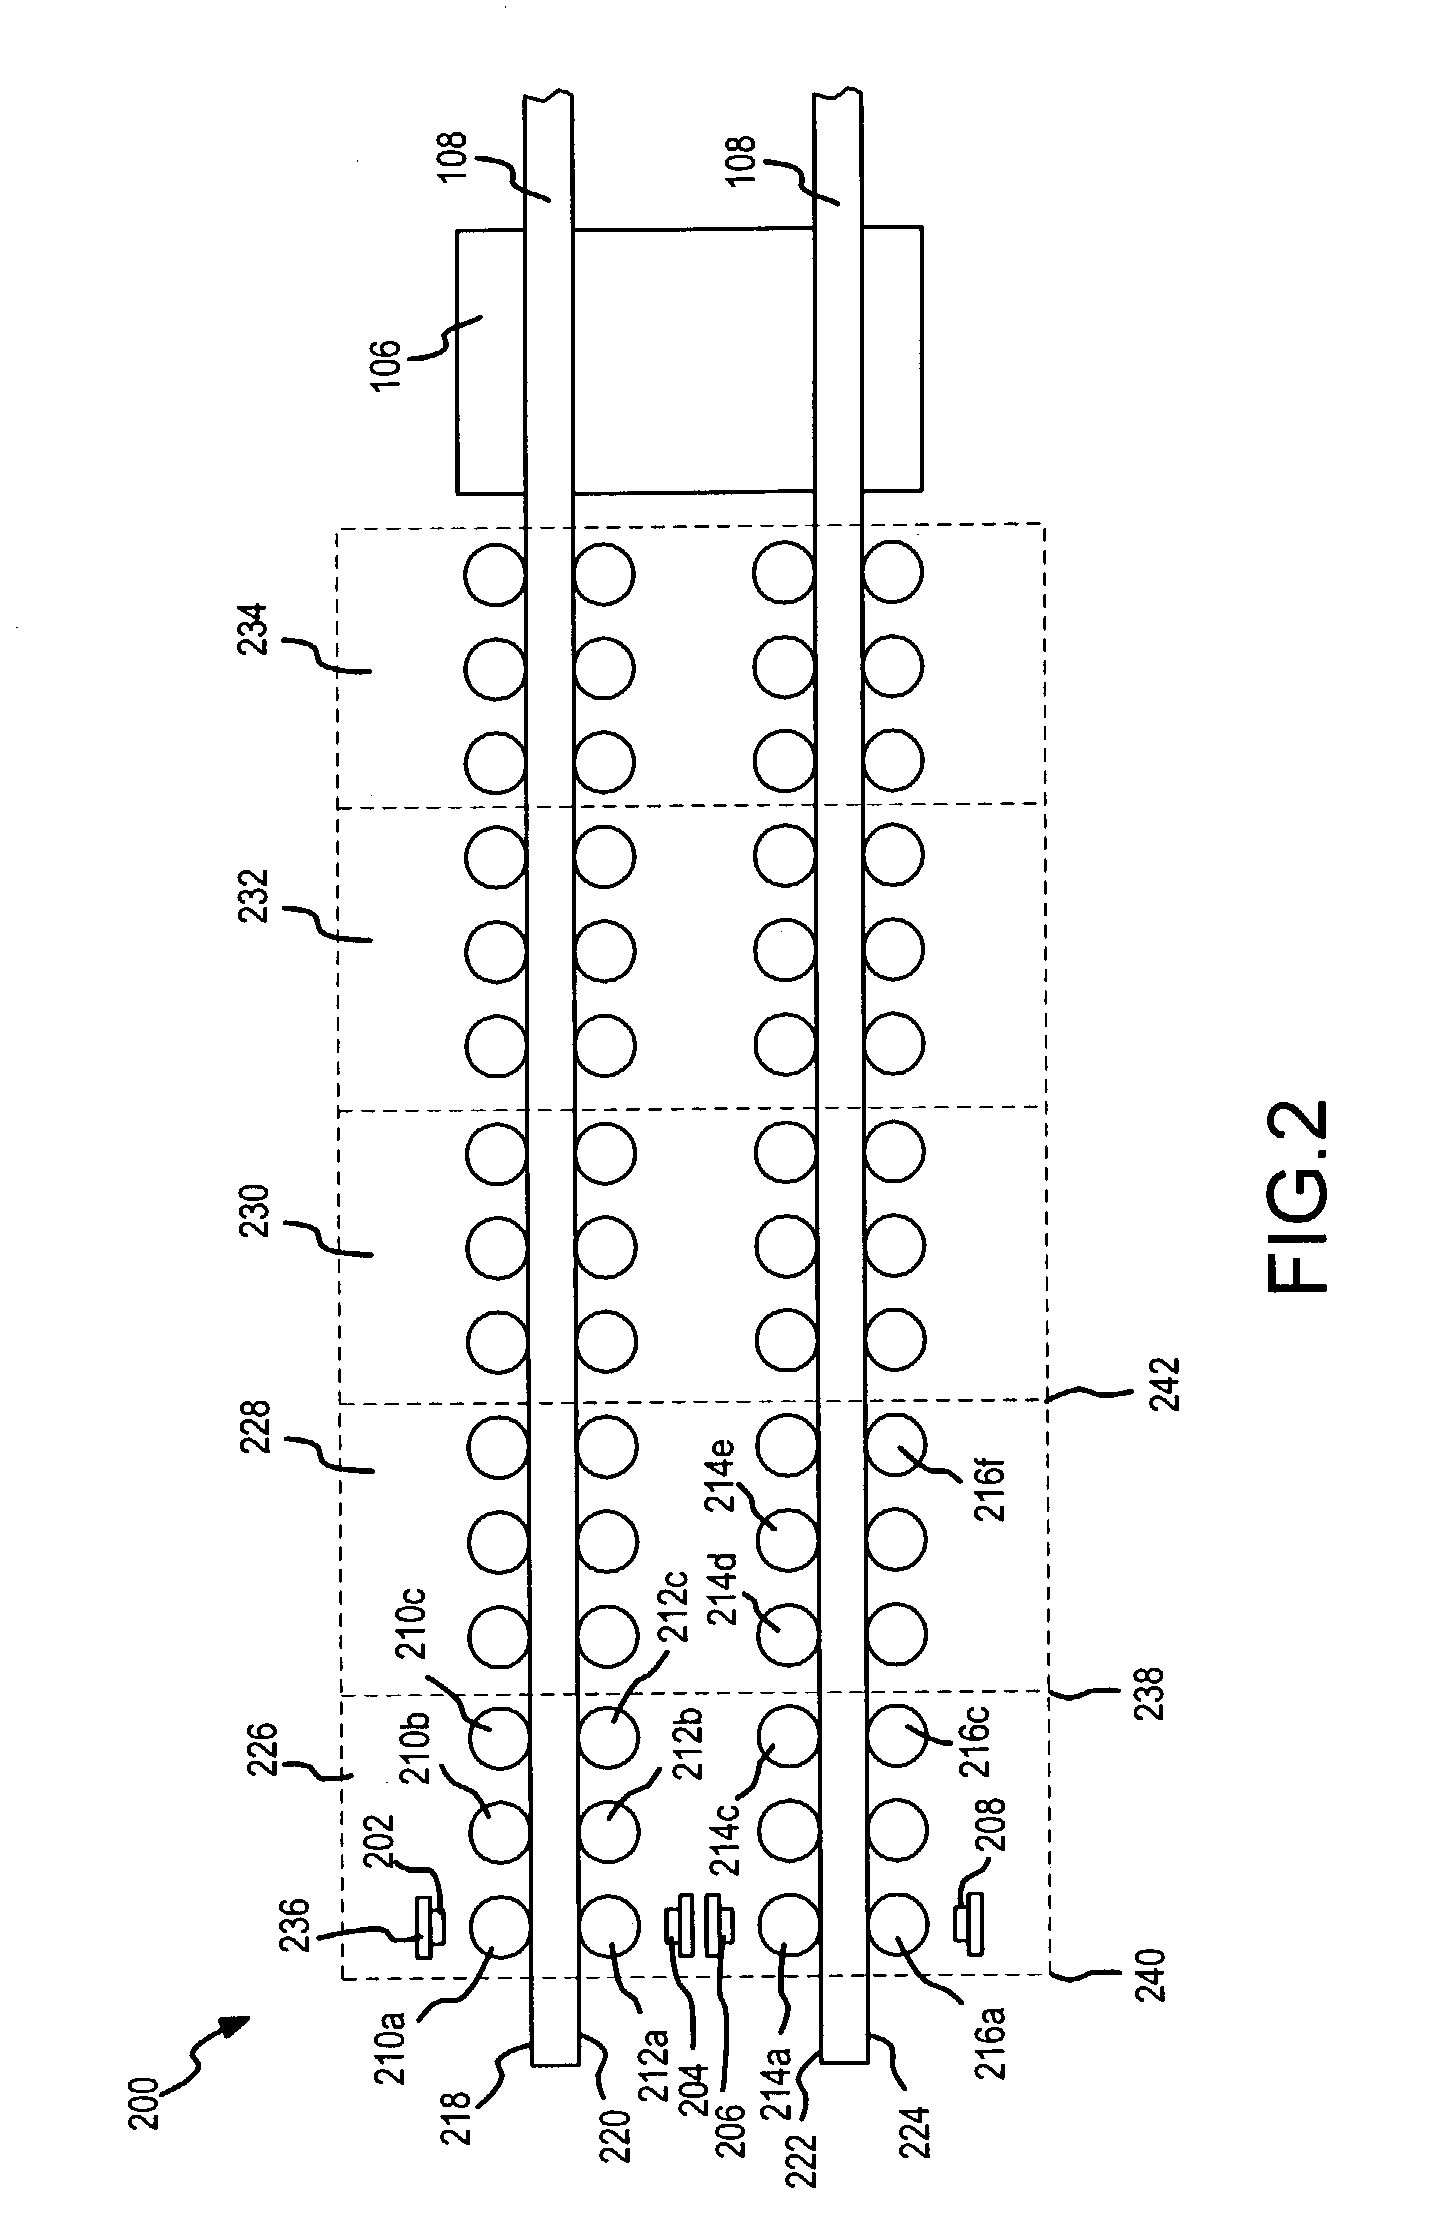 Apparatus and method for writing data to an information storage disc